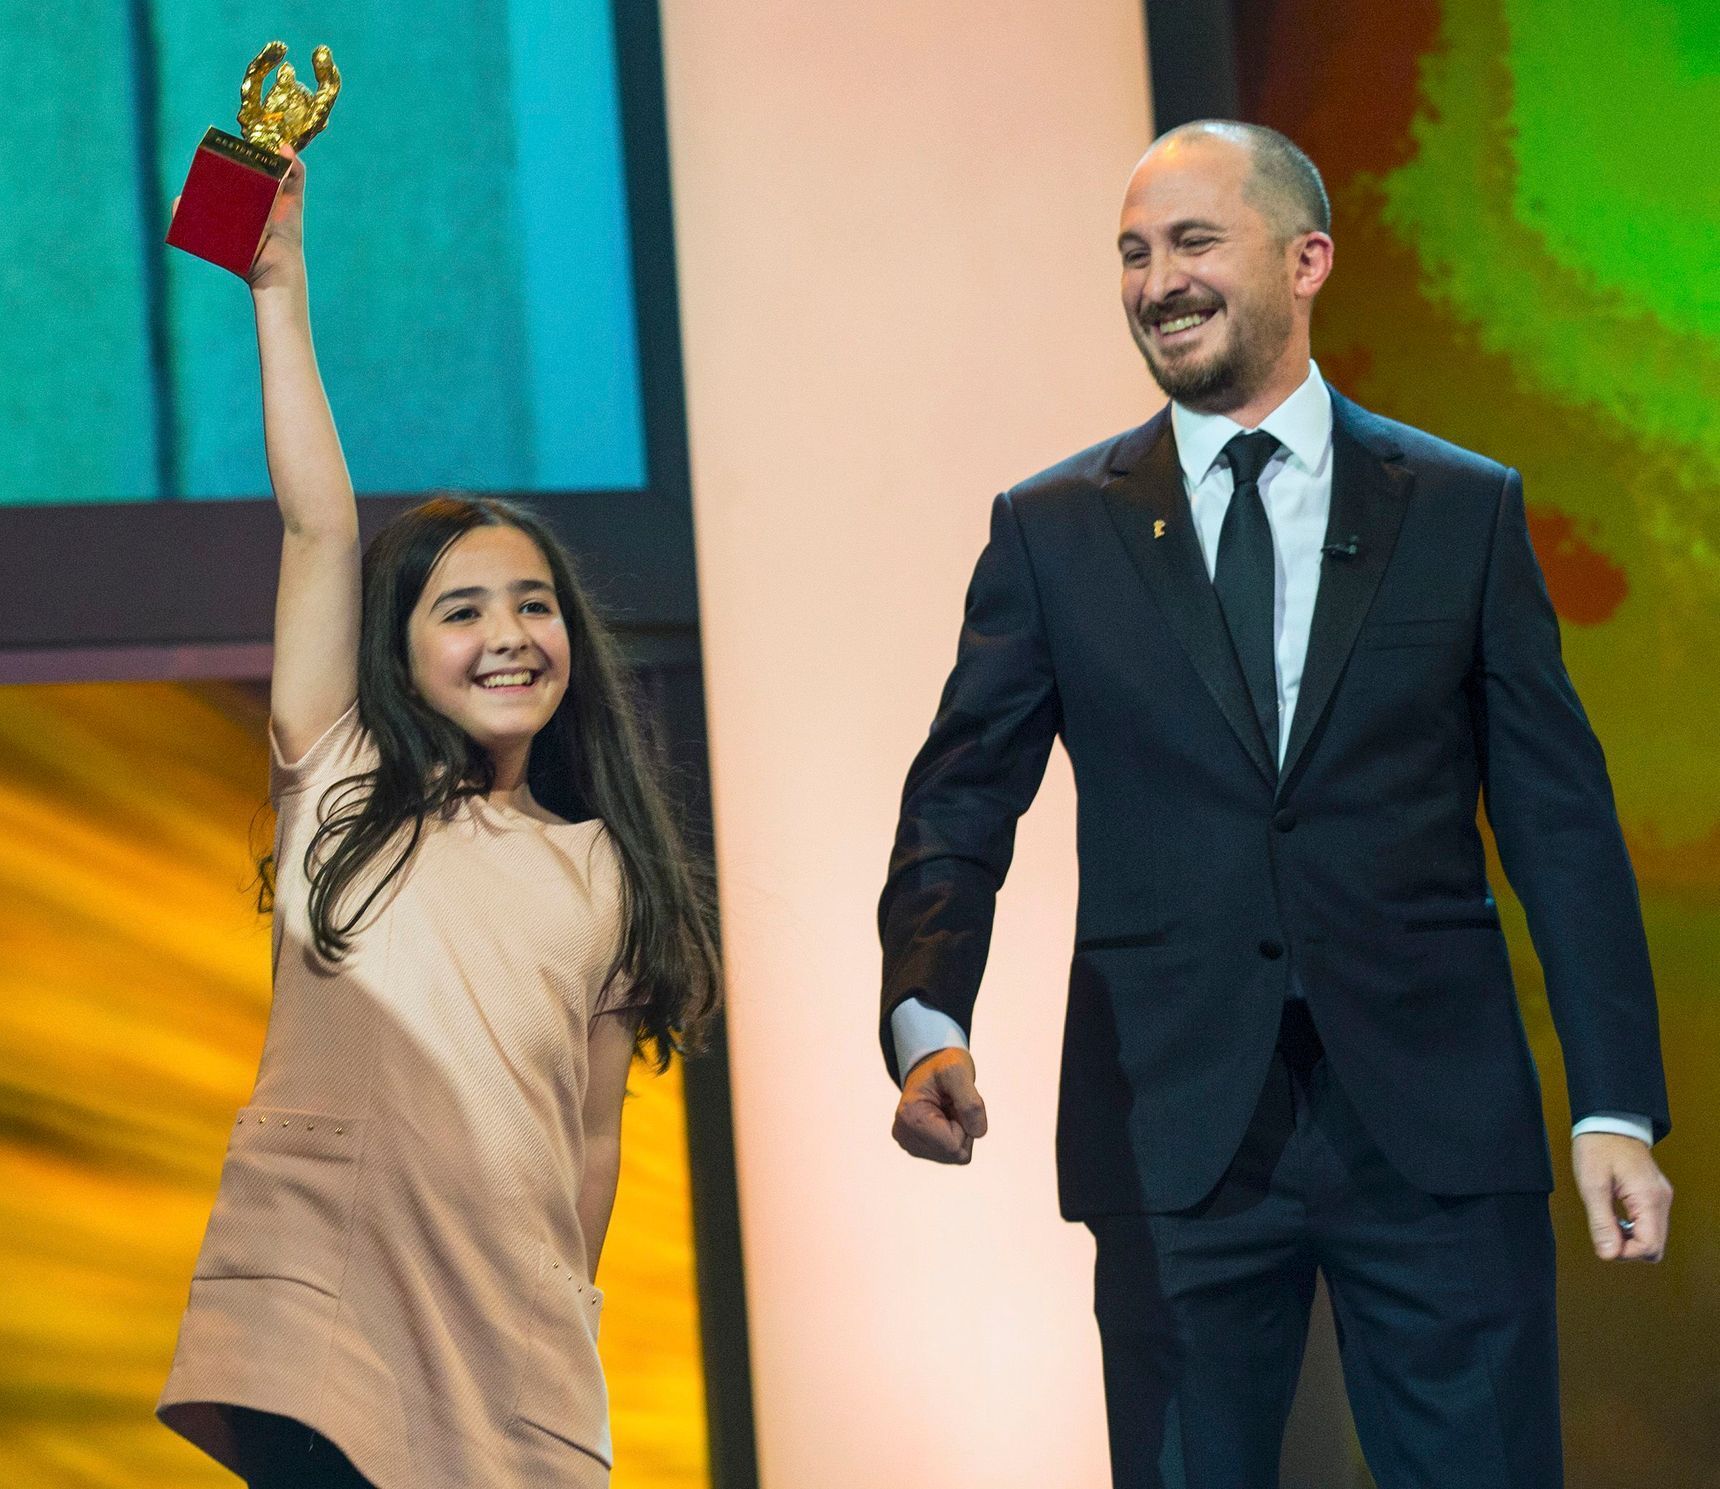 The niece of Iranian film director Panahi accepts the Golden Bear for Best Film on her uncle's behalf during awards ceremony at 65th Berlinale International Film Festival in Berlin